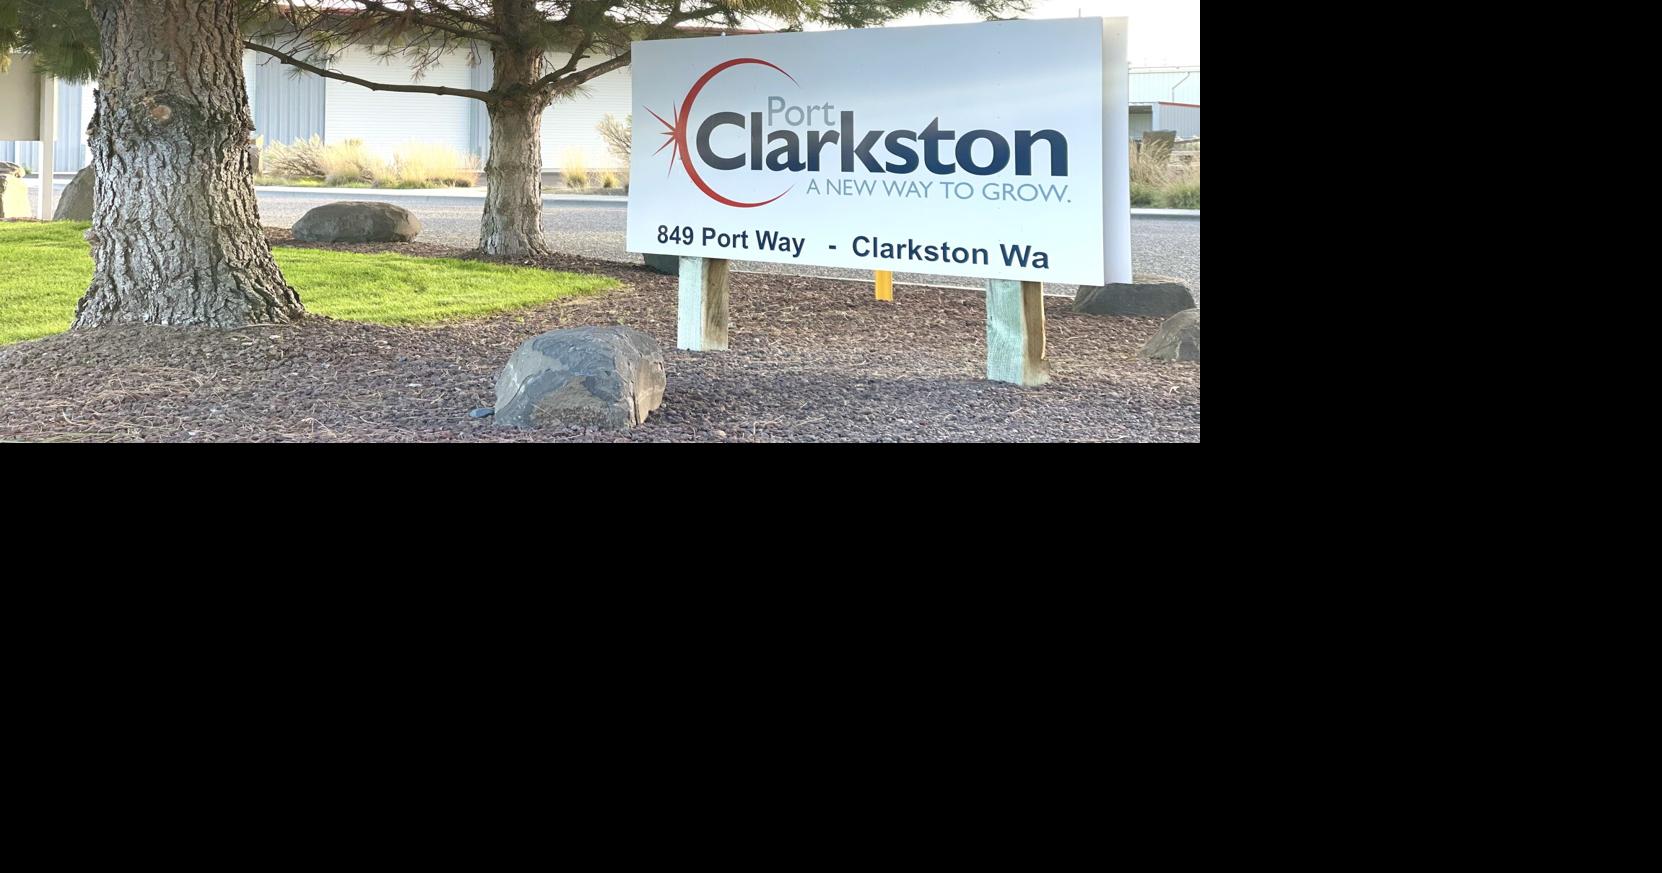 Port of Clarkston Completes Second High-Speed Internet Project in Asotin County | News